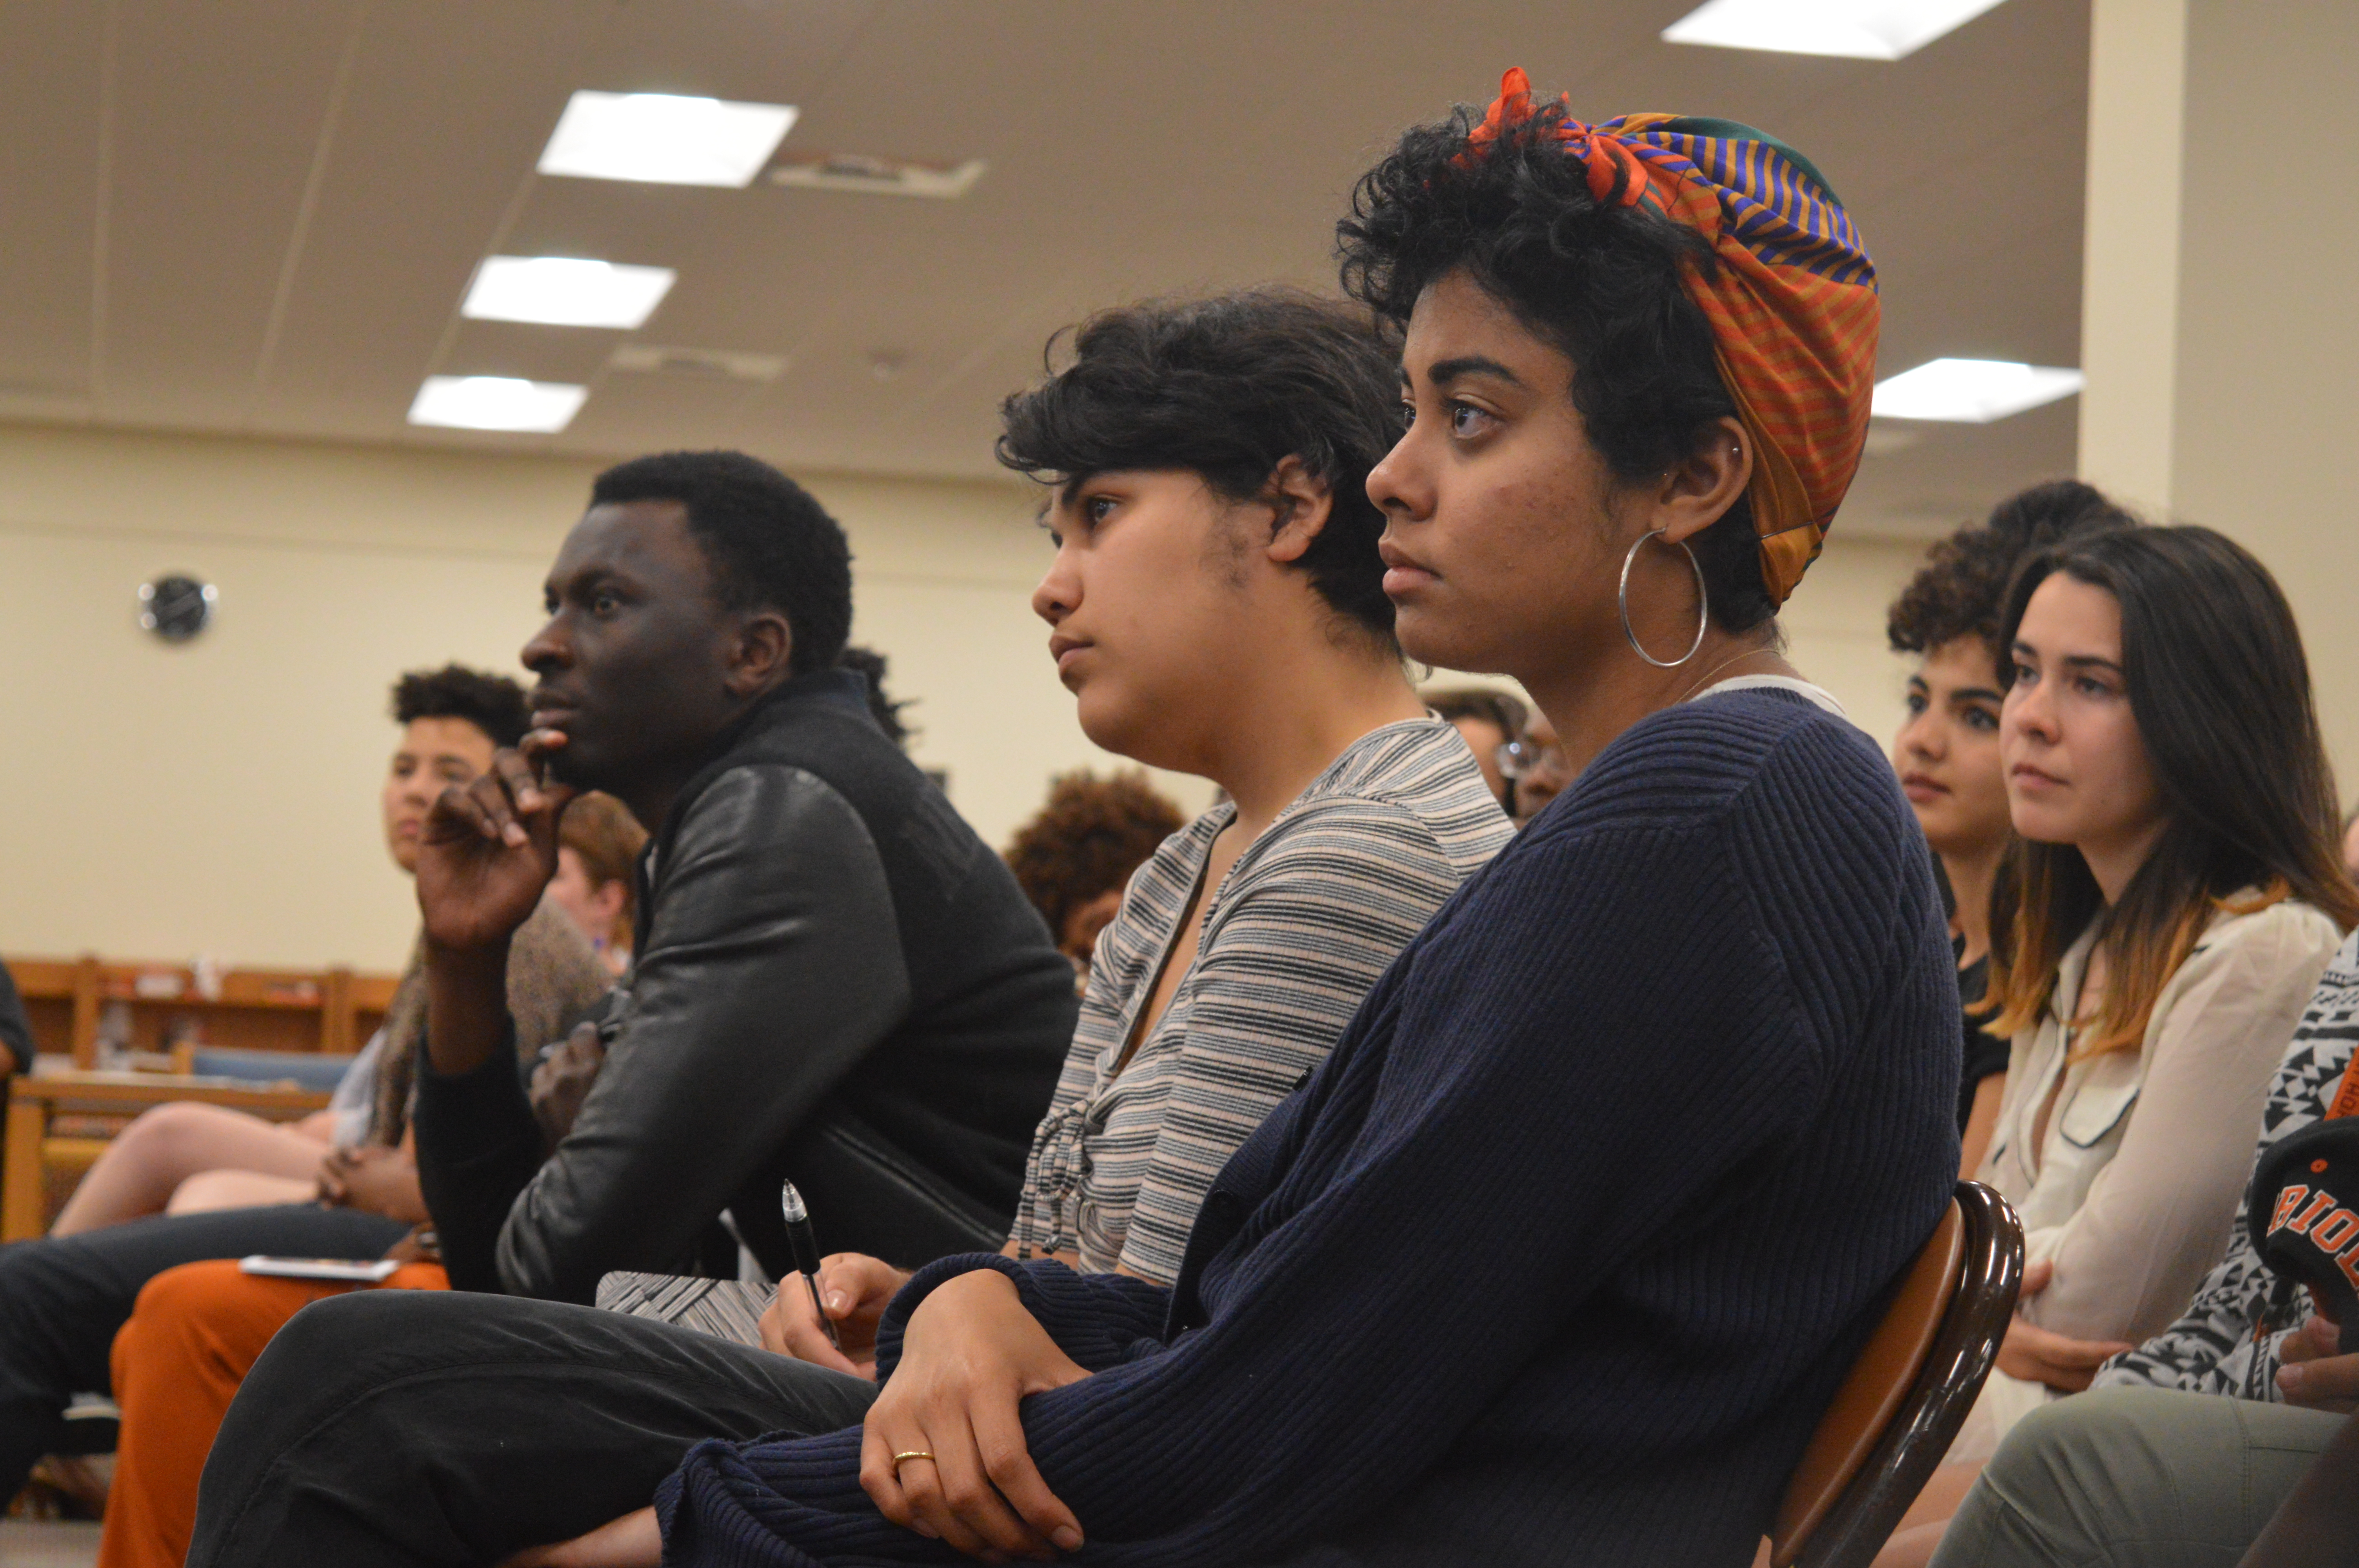 Day(s) of Dialogue: students to take “ACTIONS” addressing U.S. immigration policy